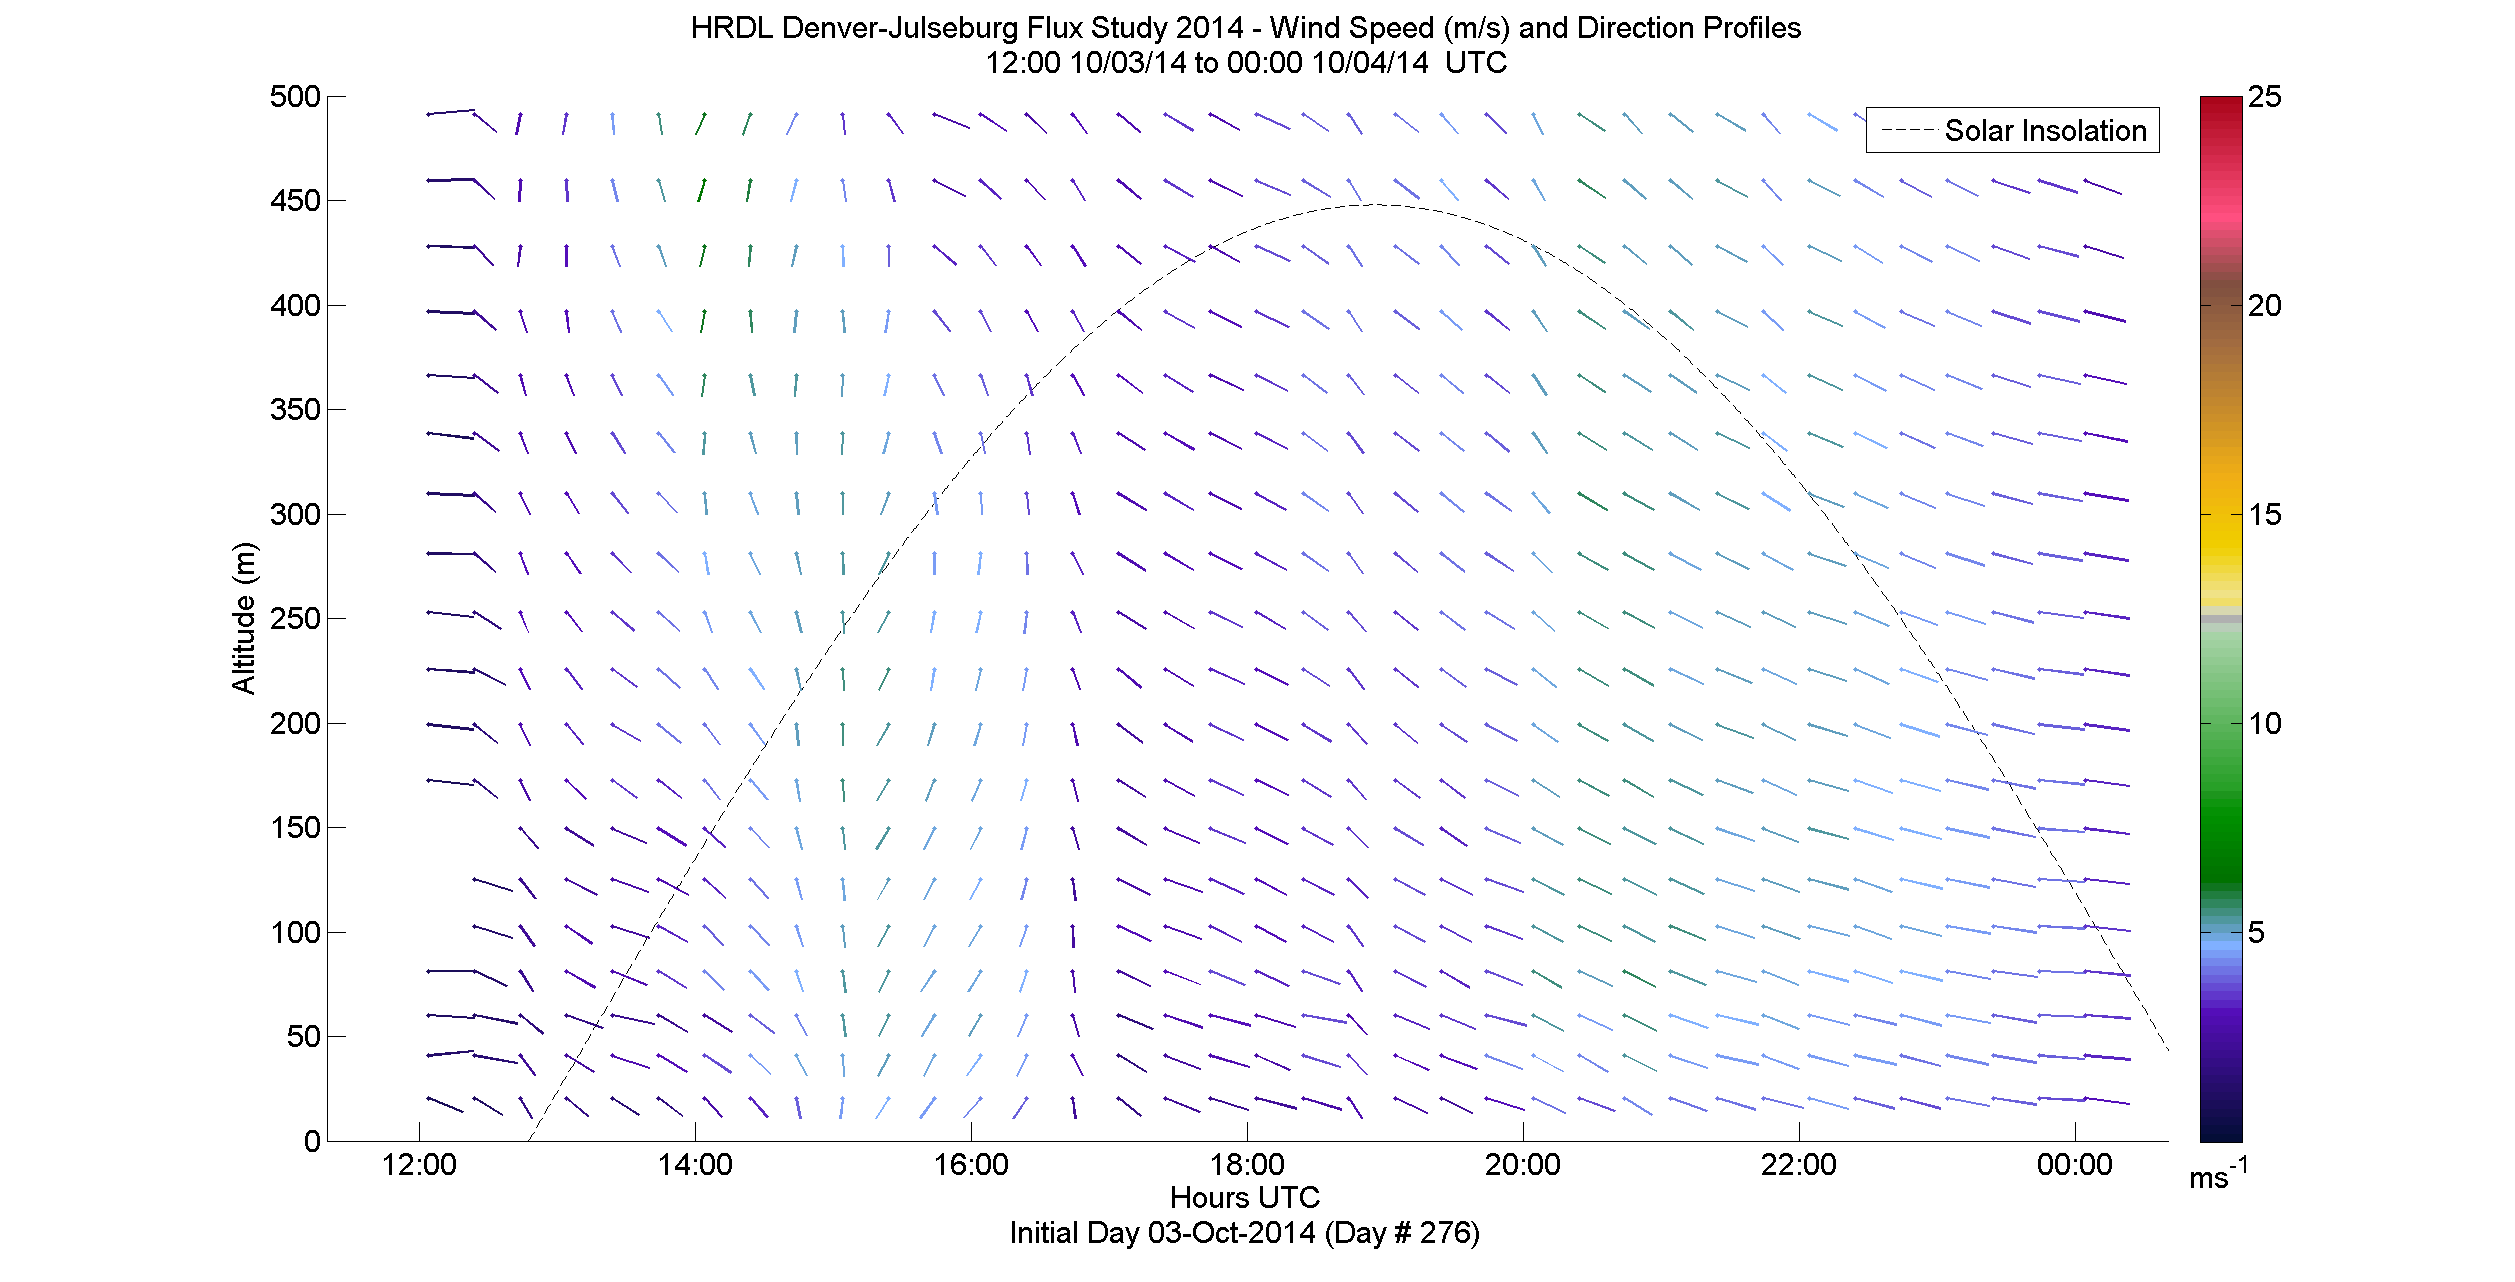 HRDL speed and direction profile - October 3 pm